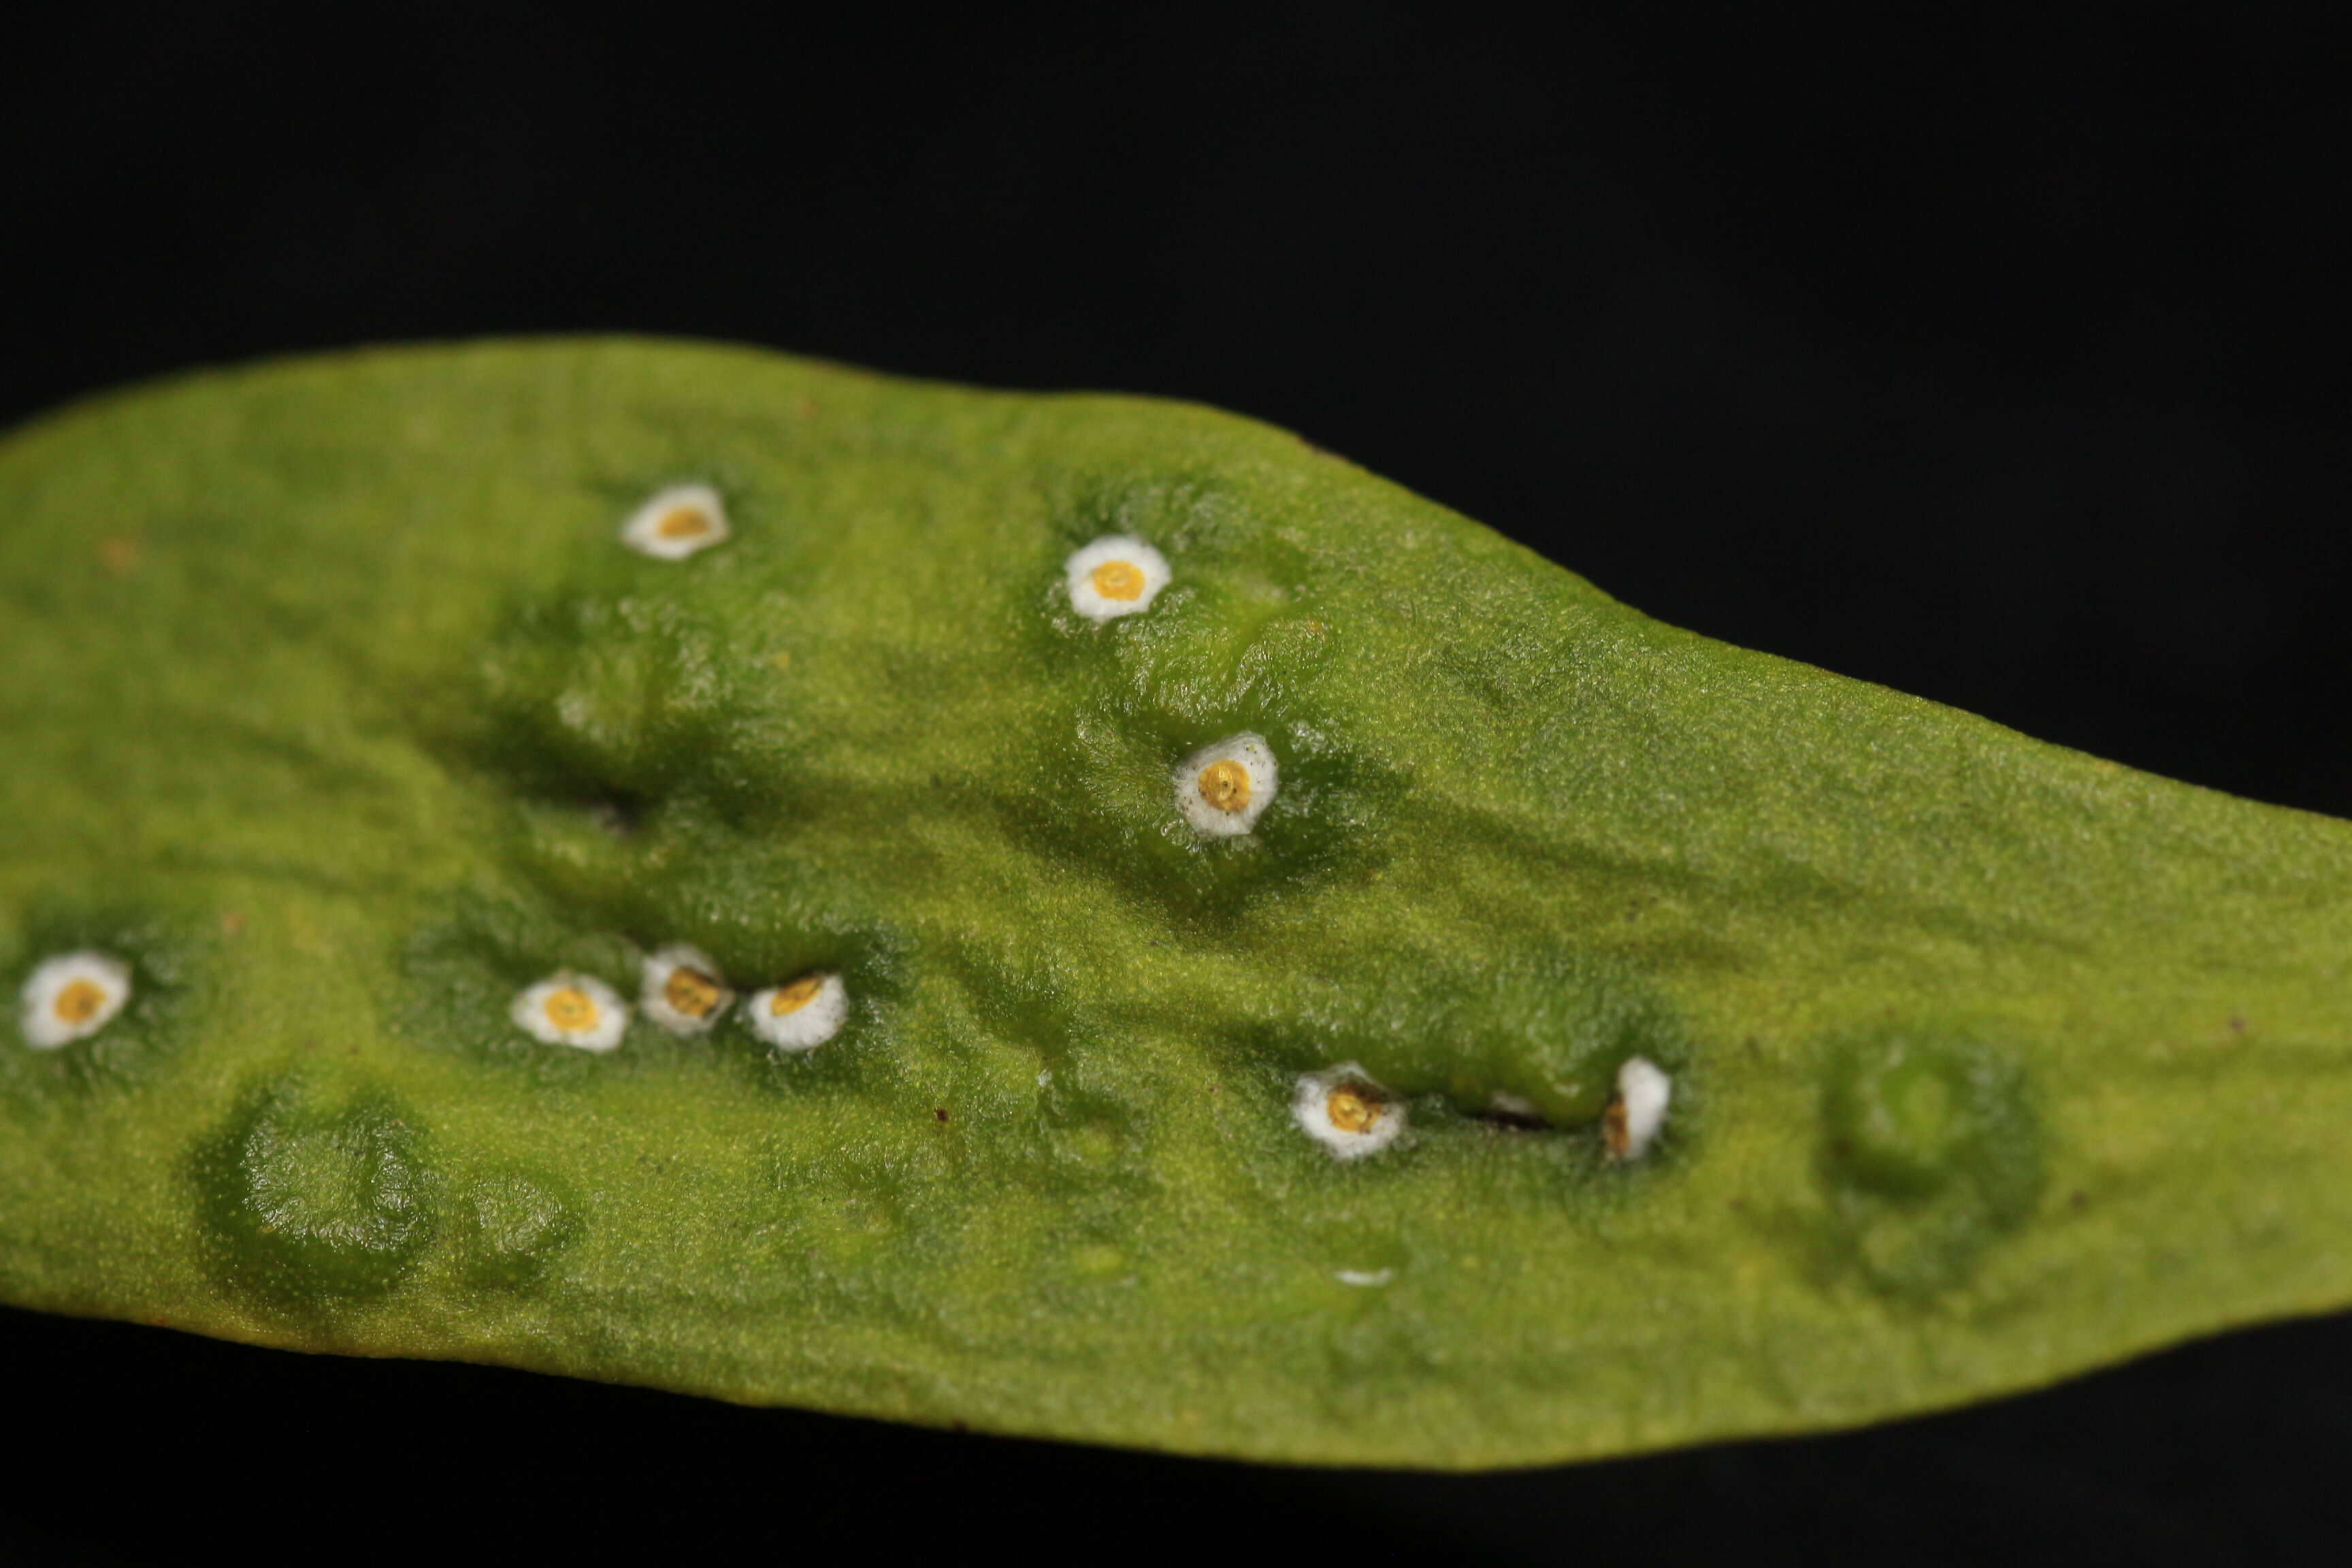 Image of armored scale insects